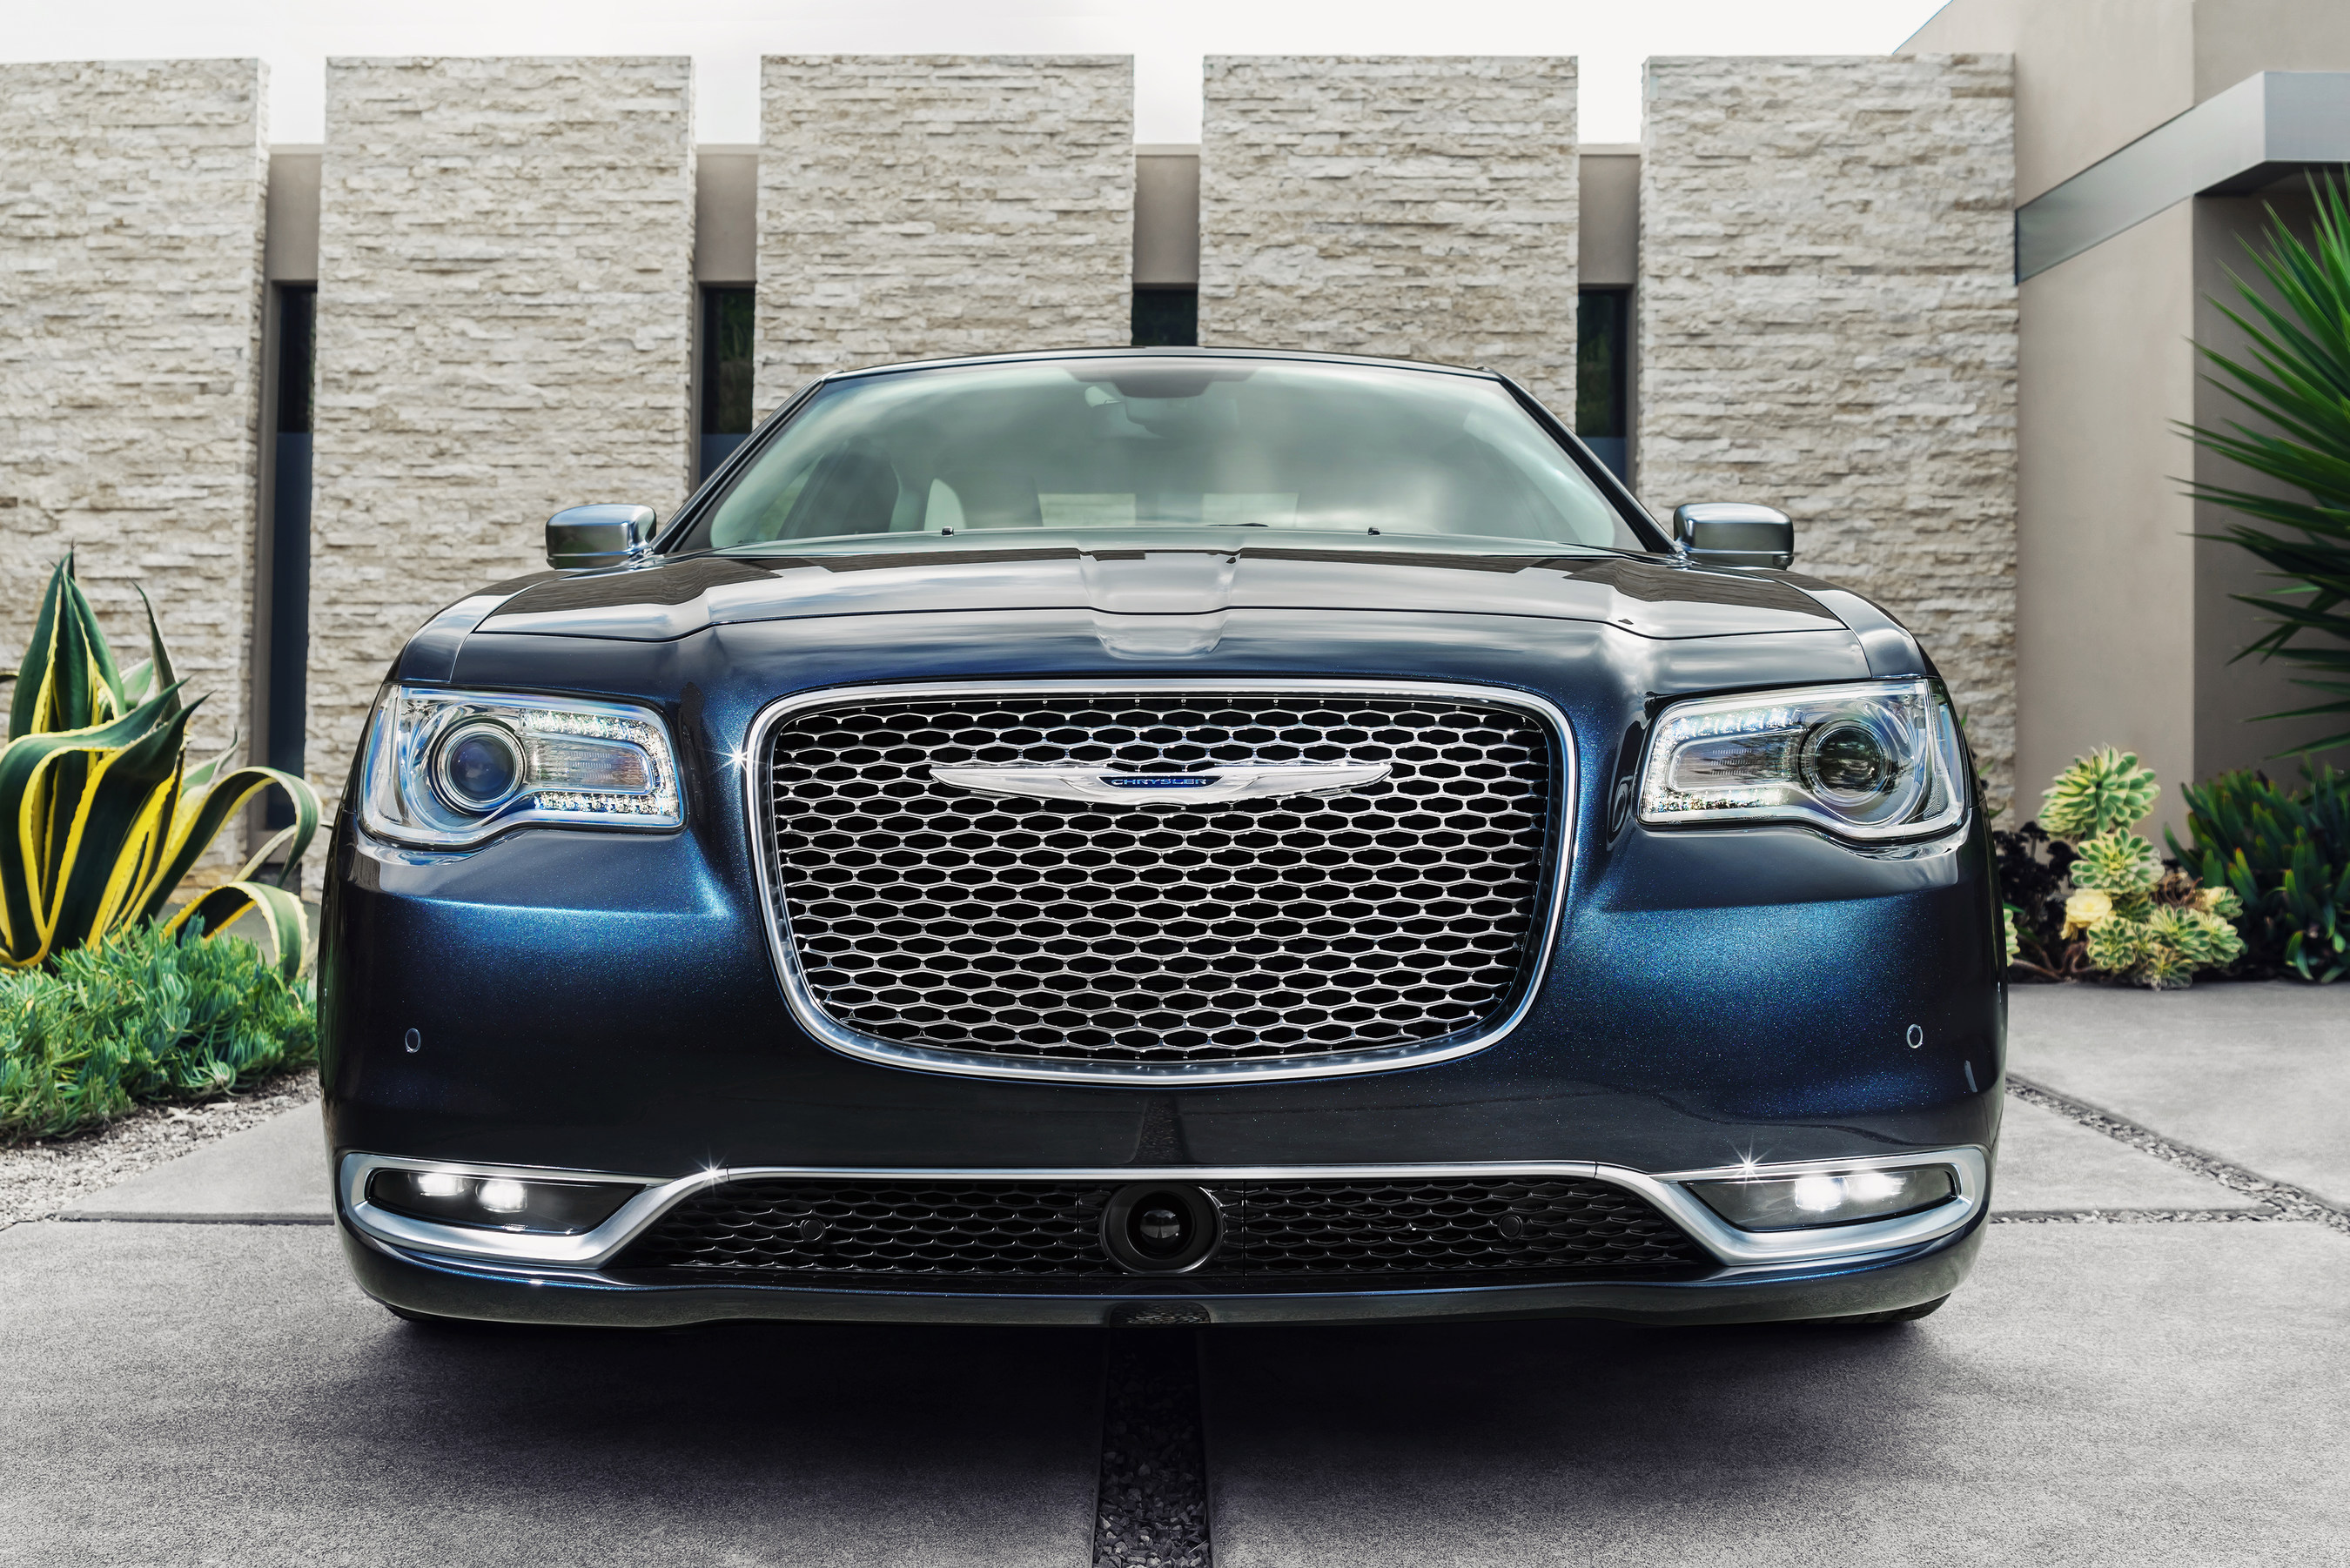 The new 2015 Chrysler 300 highlights six decades of ambitious American ingenuity through iconic design proportions inspired by historic 1955 and 2005 models - world-class quality, materials and refinement, best-in-class V-6 highway fuel economy, plus segment-exclusive innovations - all at the same $31,395 starting price as its predecessor.